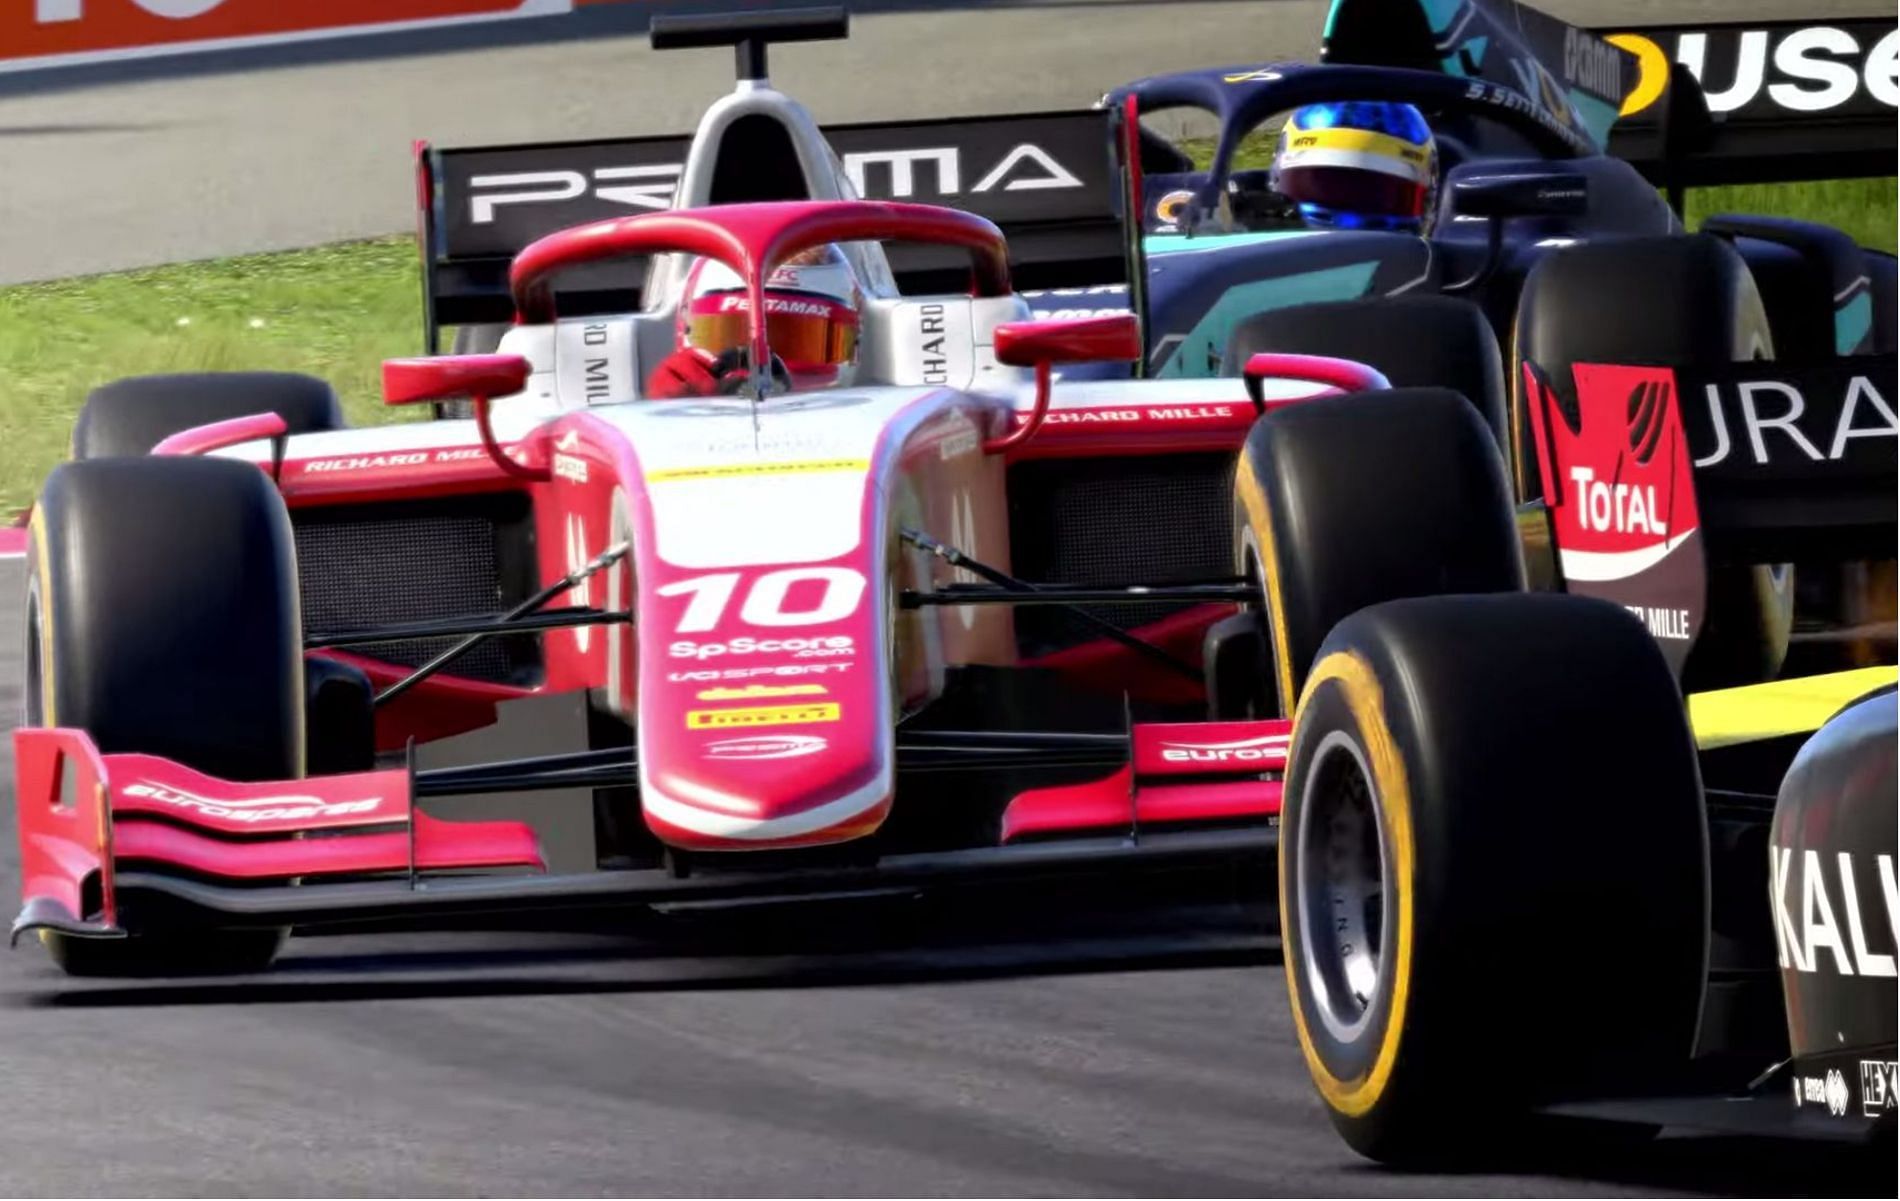 F1 22 cross-play multiplayer coming later this month